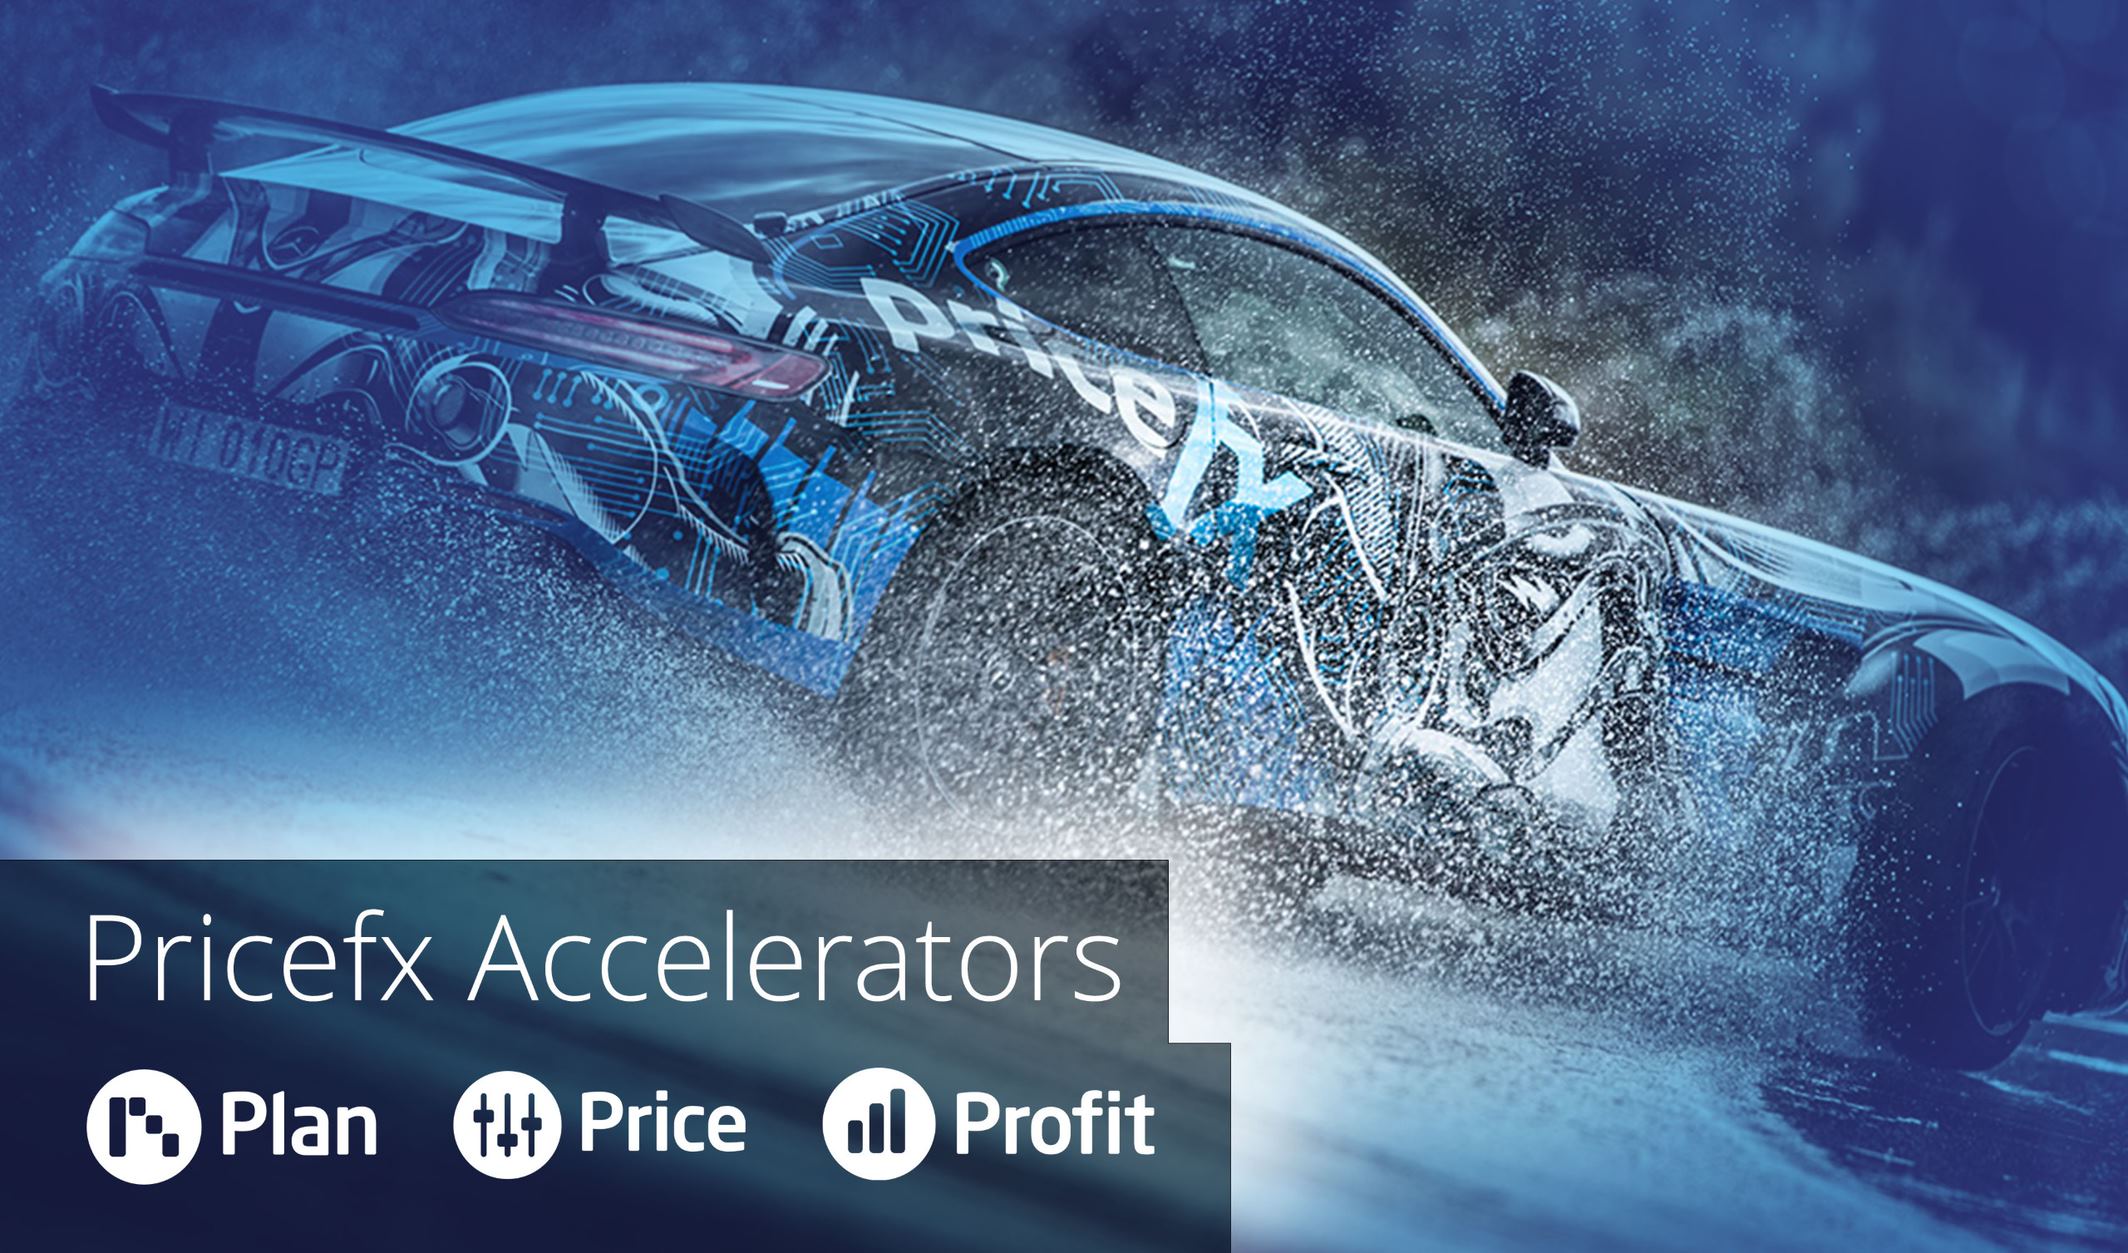 Pricefx-Accelerators-and-Pricefx-color-scheme-sports-car-on-wet-track